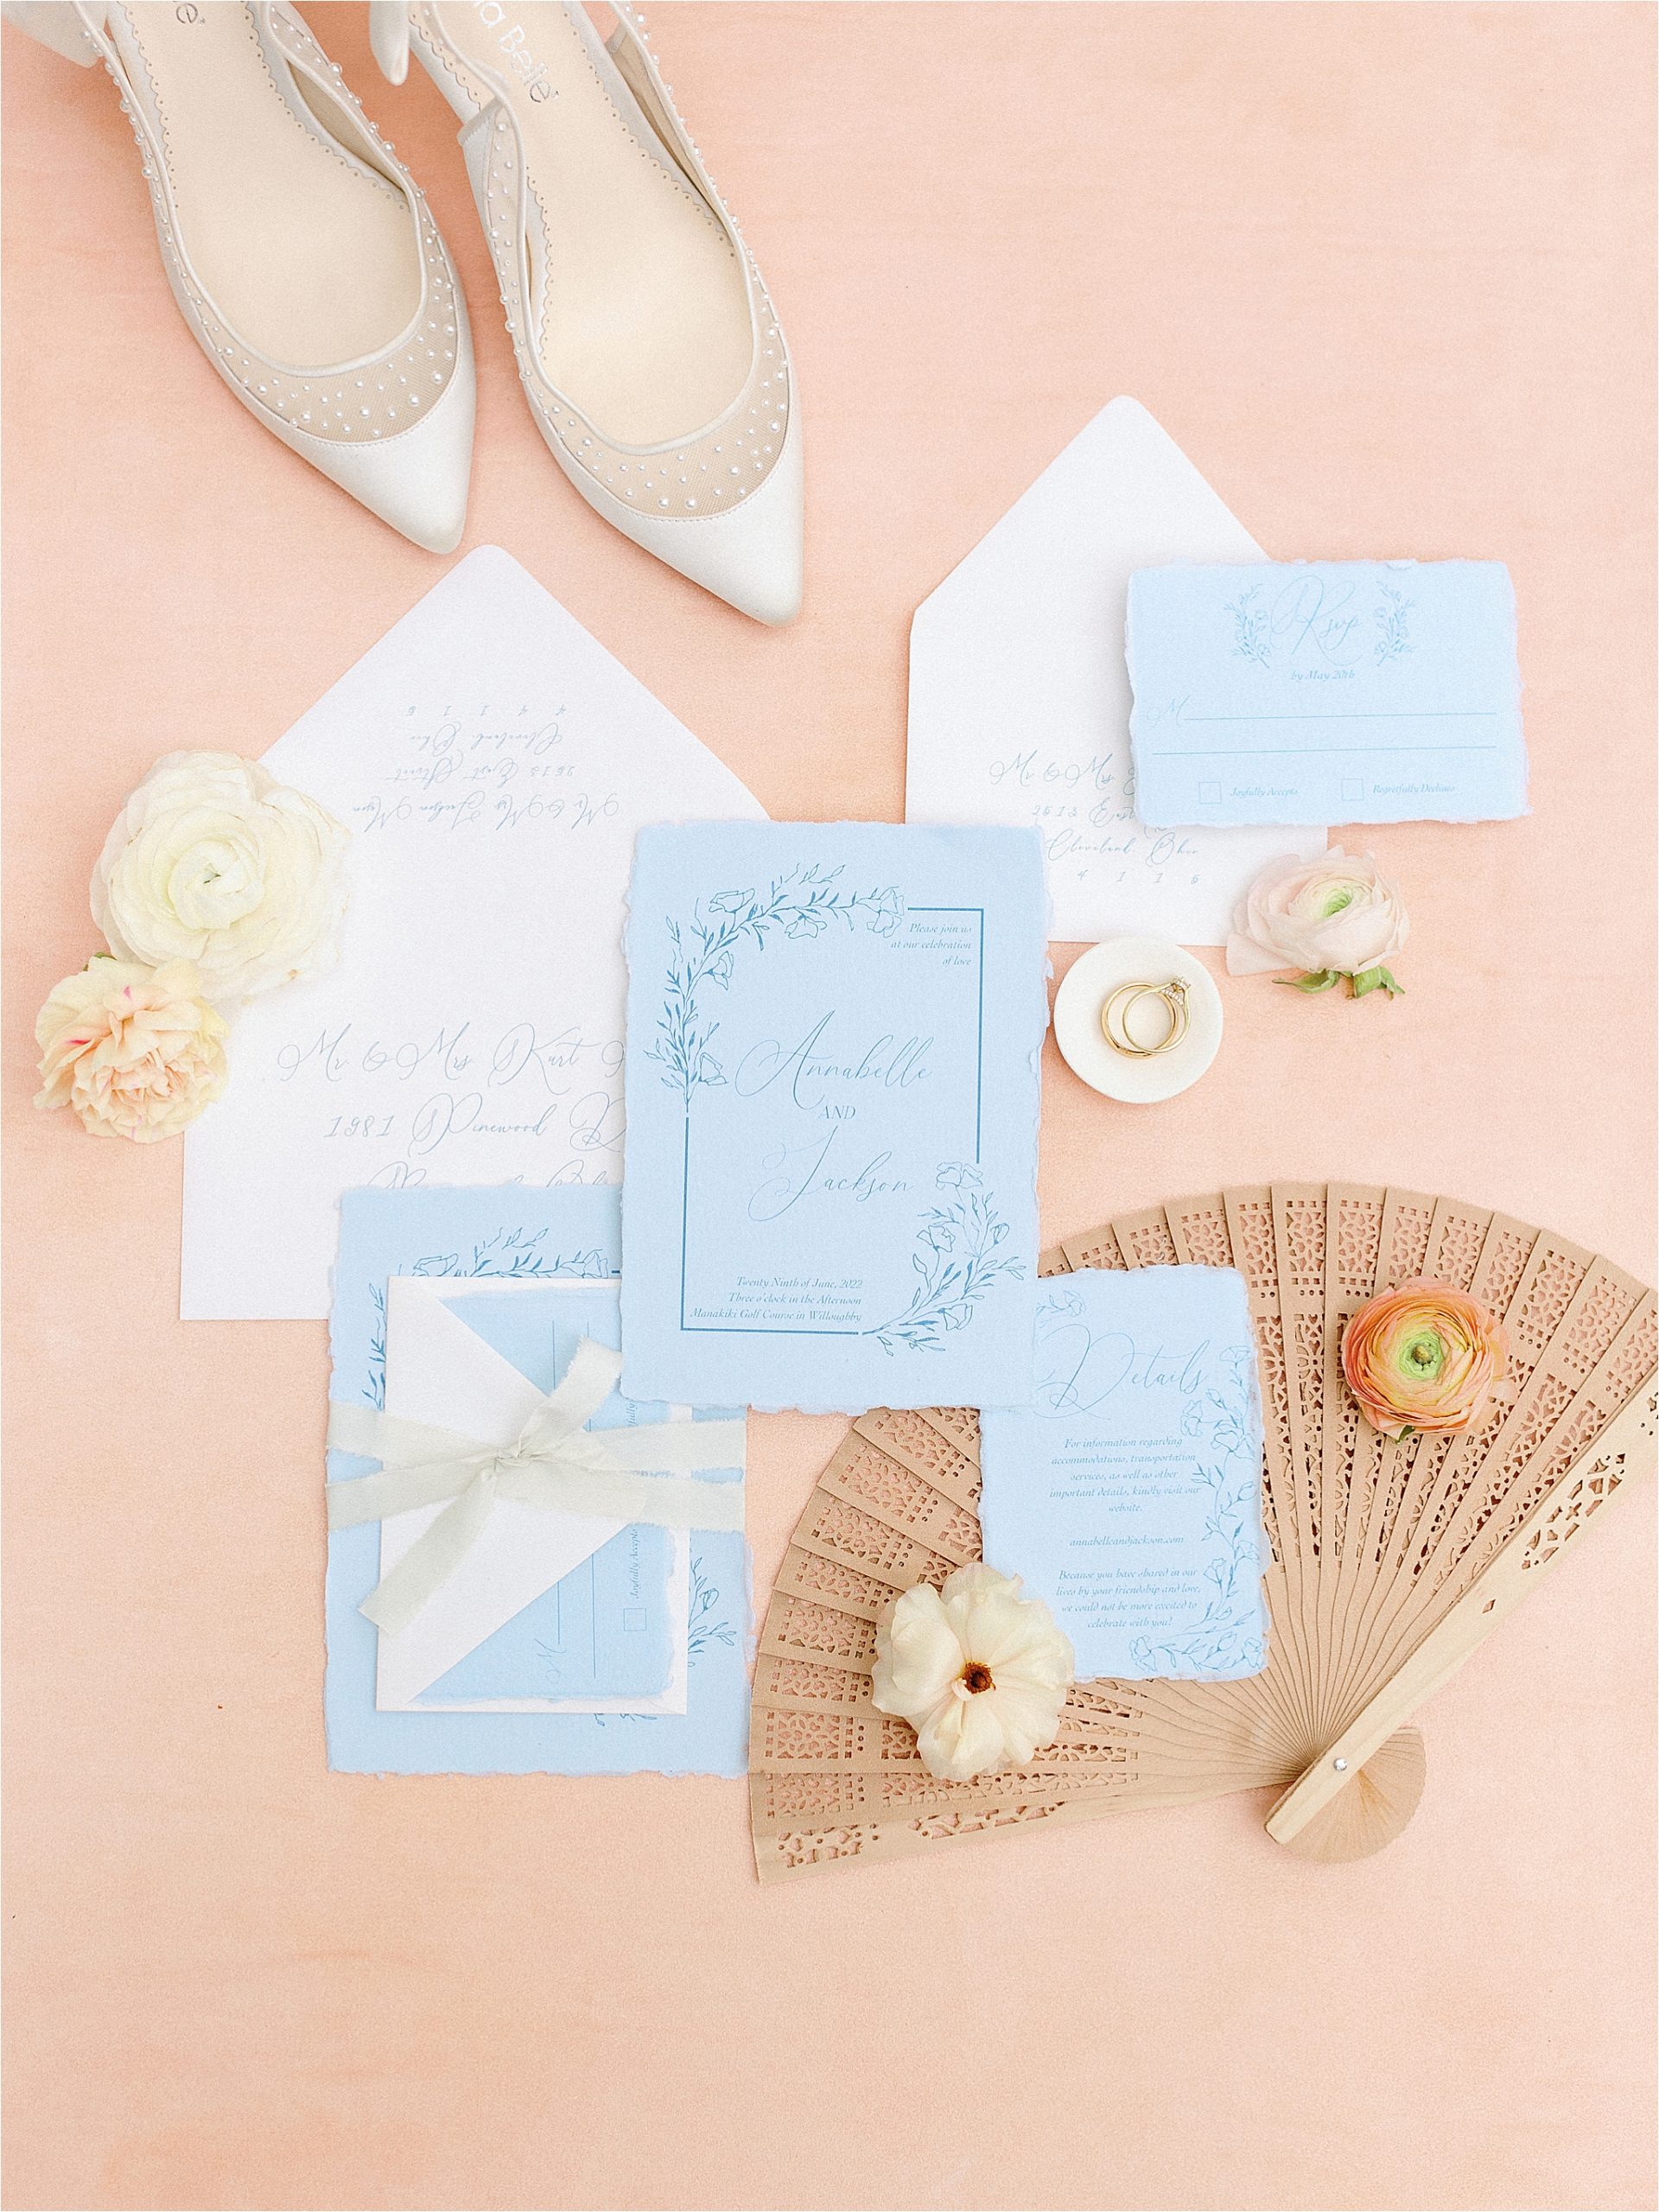 blue and white floral invitations with deckled edge